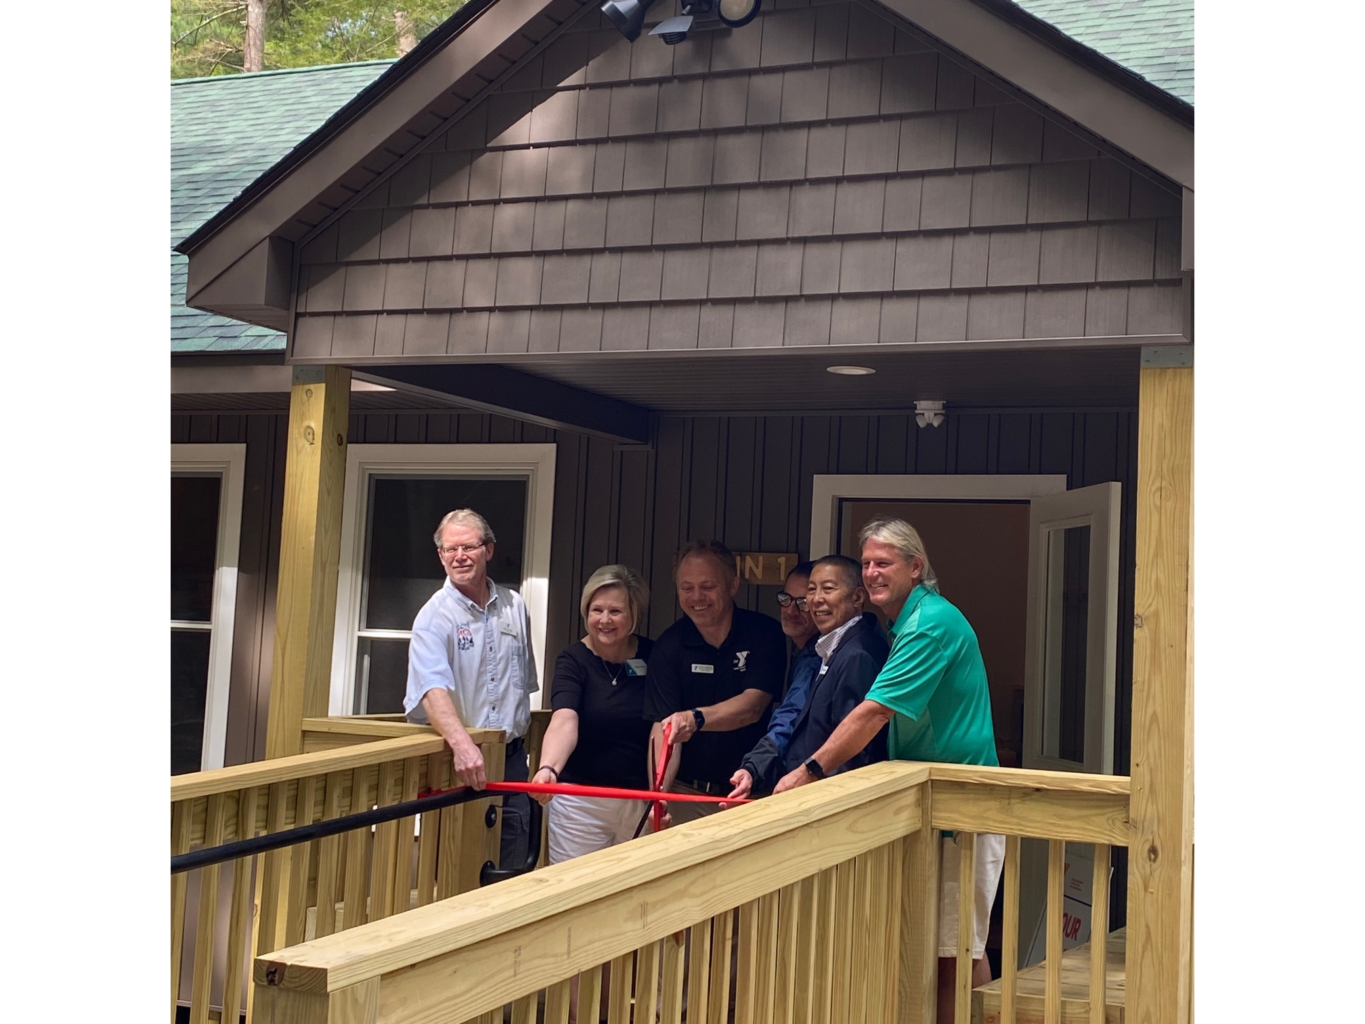 Senator Witkos (r) joins YMCA staff in cutting the ribbon on a brand new cabin for campers.